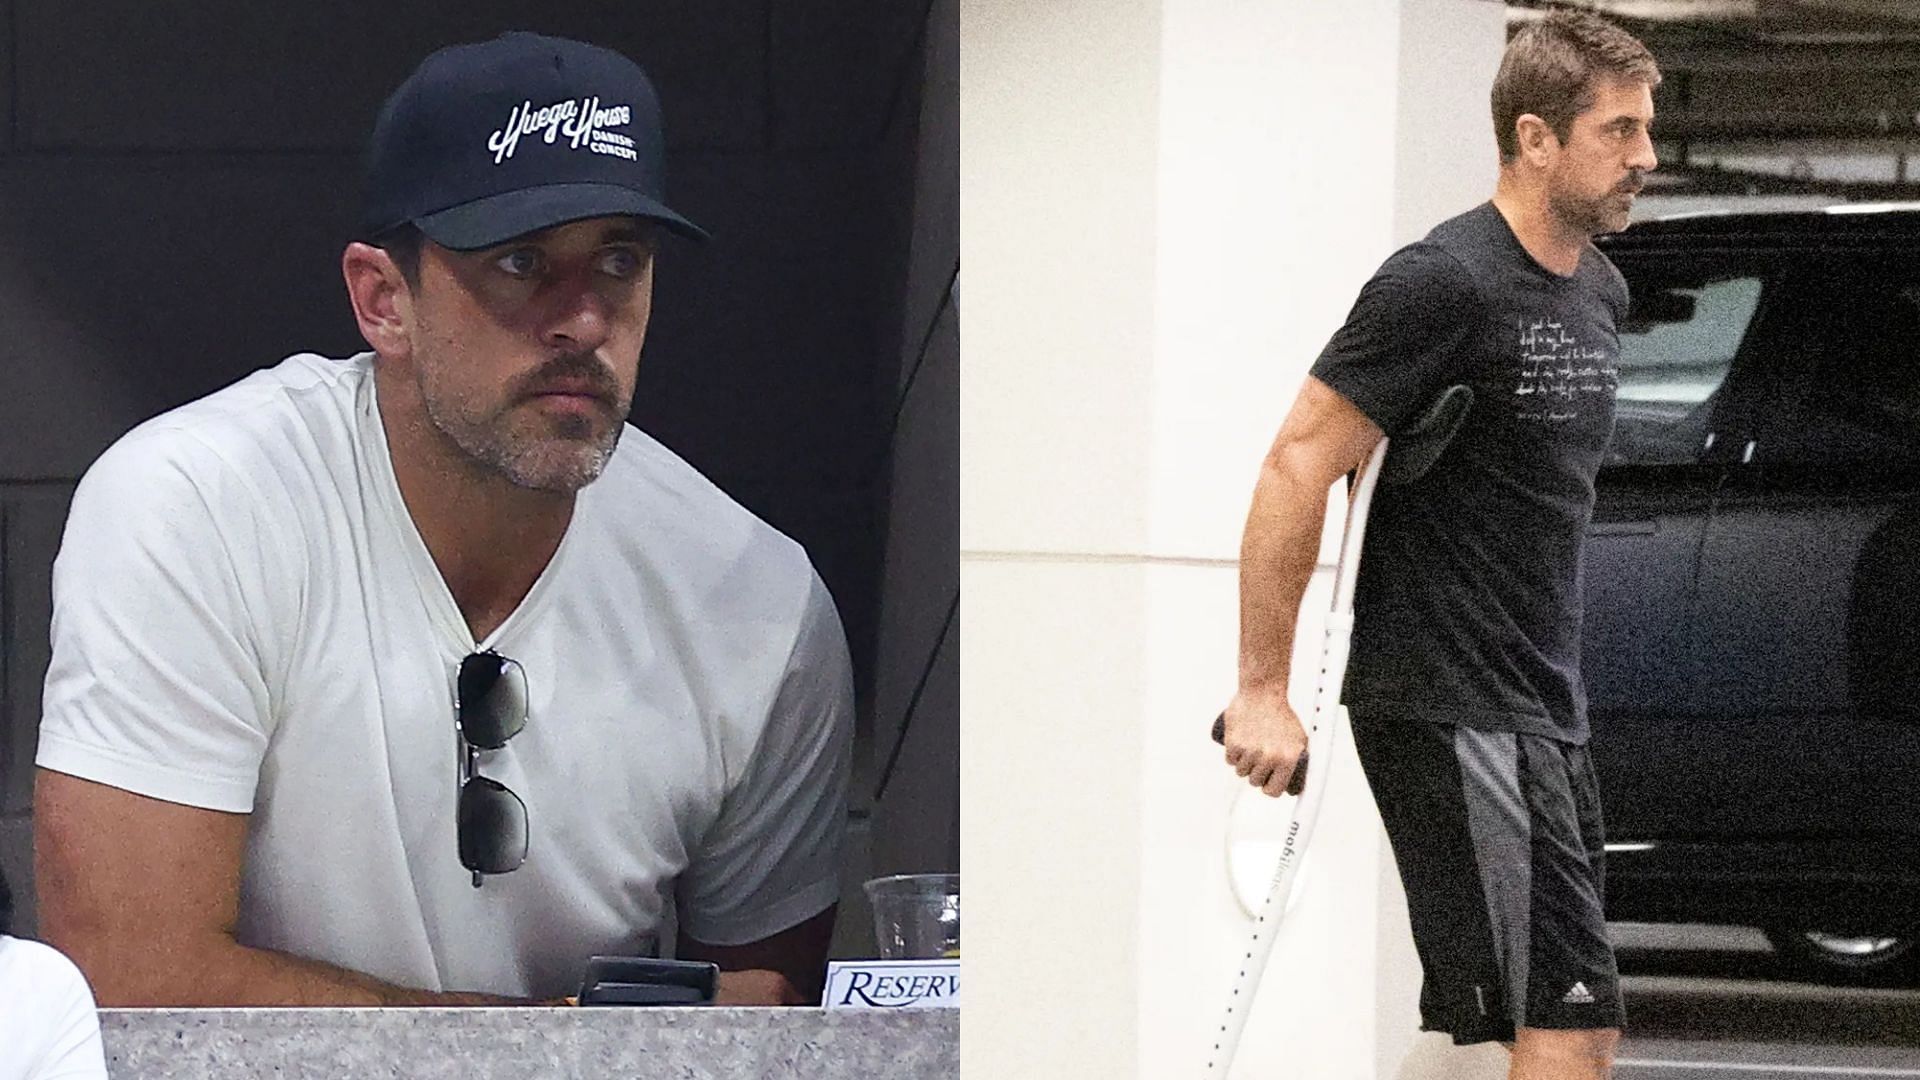 Aaron Rodgers has been seen on crutches for the first time (images via Getty and the New York Post)